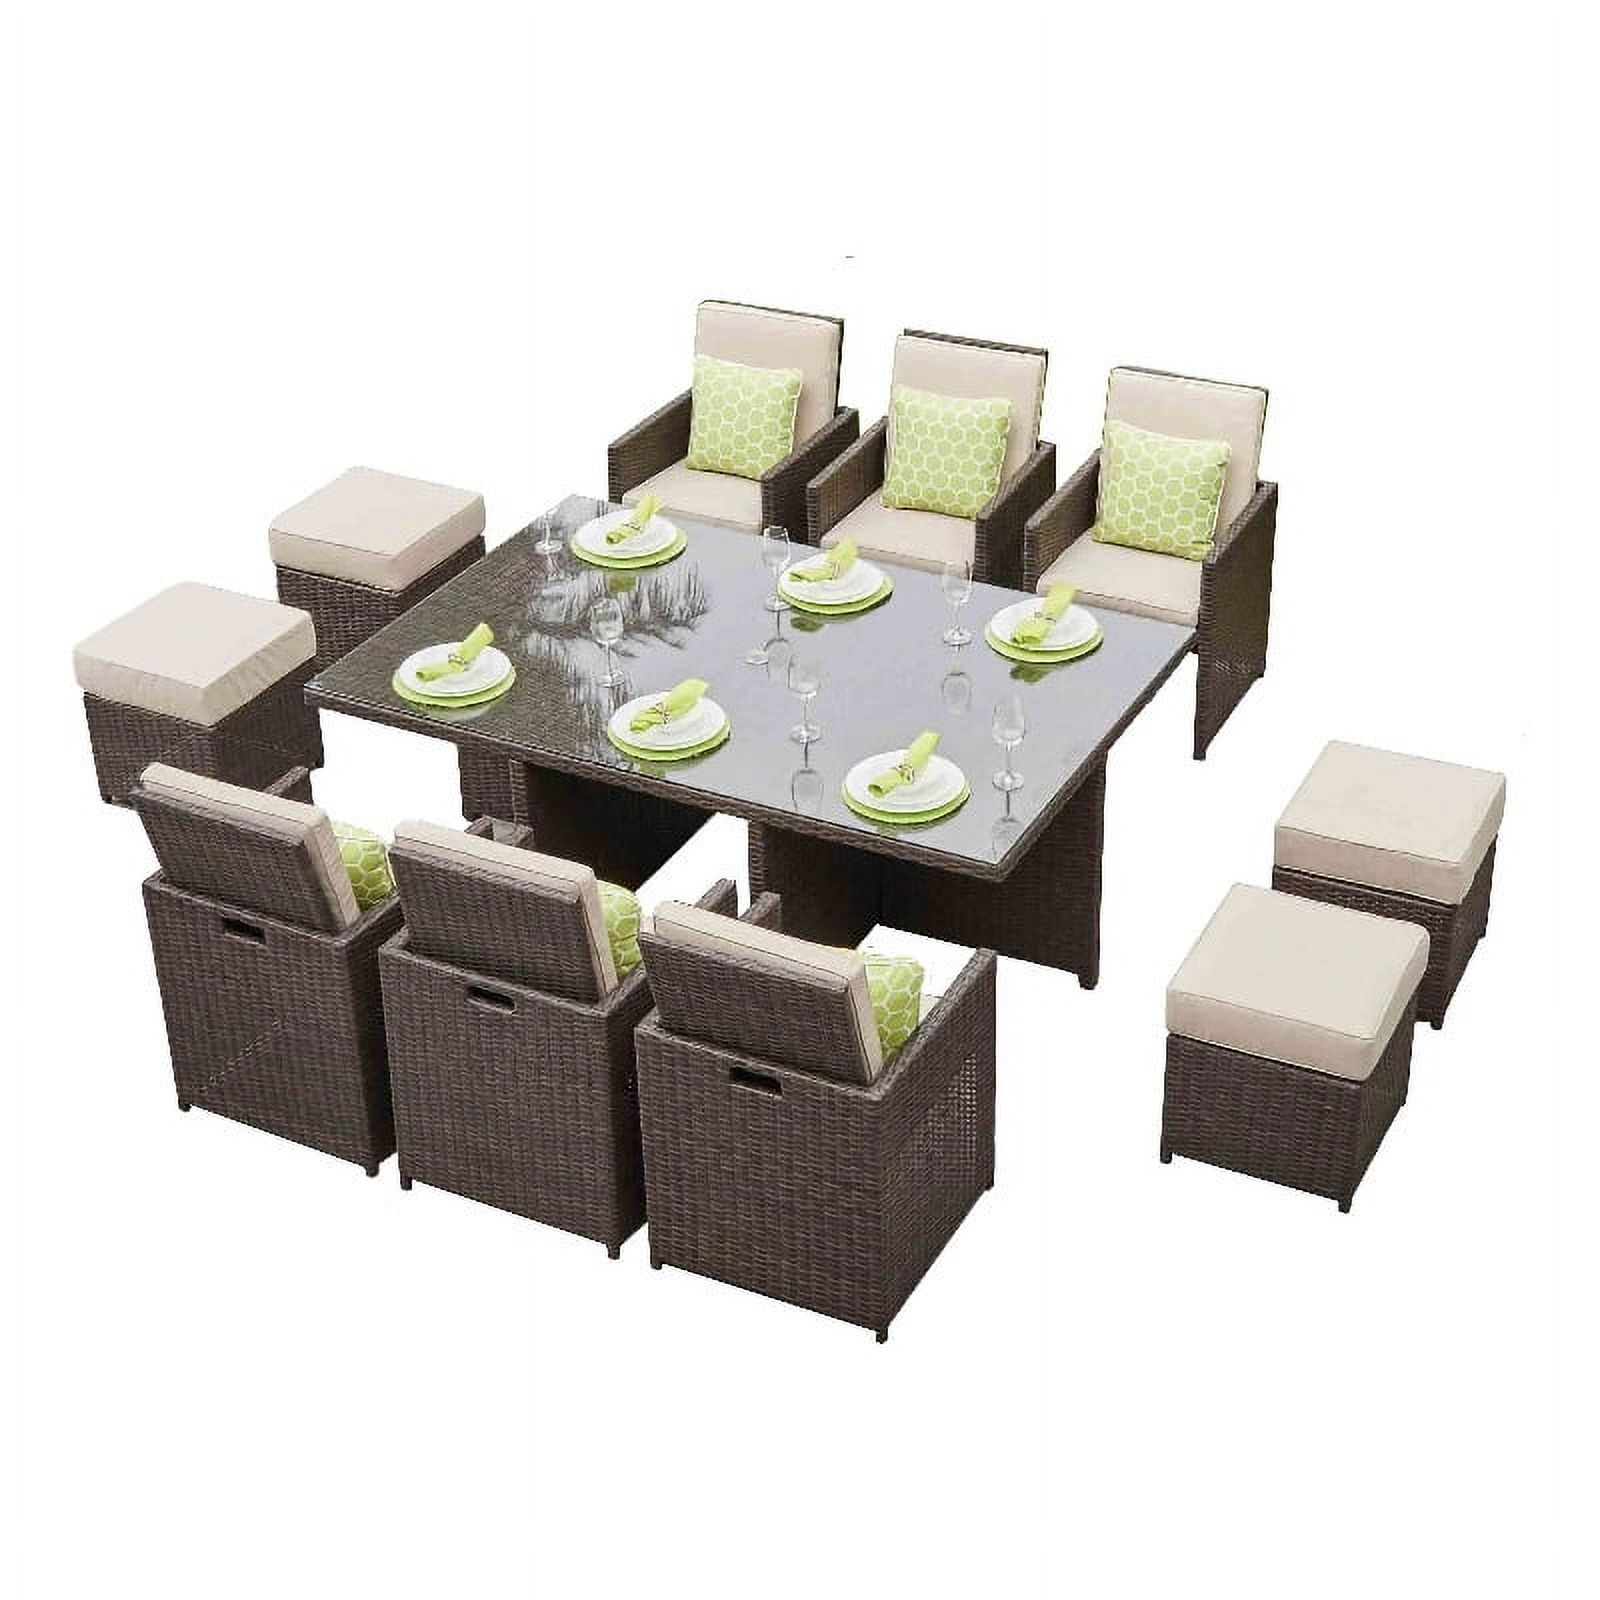 11-Pieces Brown Rattan Outdoor Dining Table with Beige Cushions - image 1 of 9